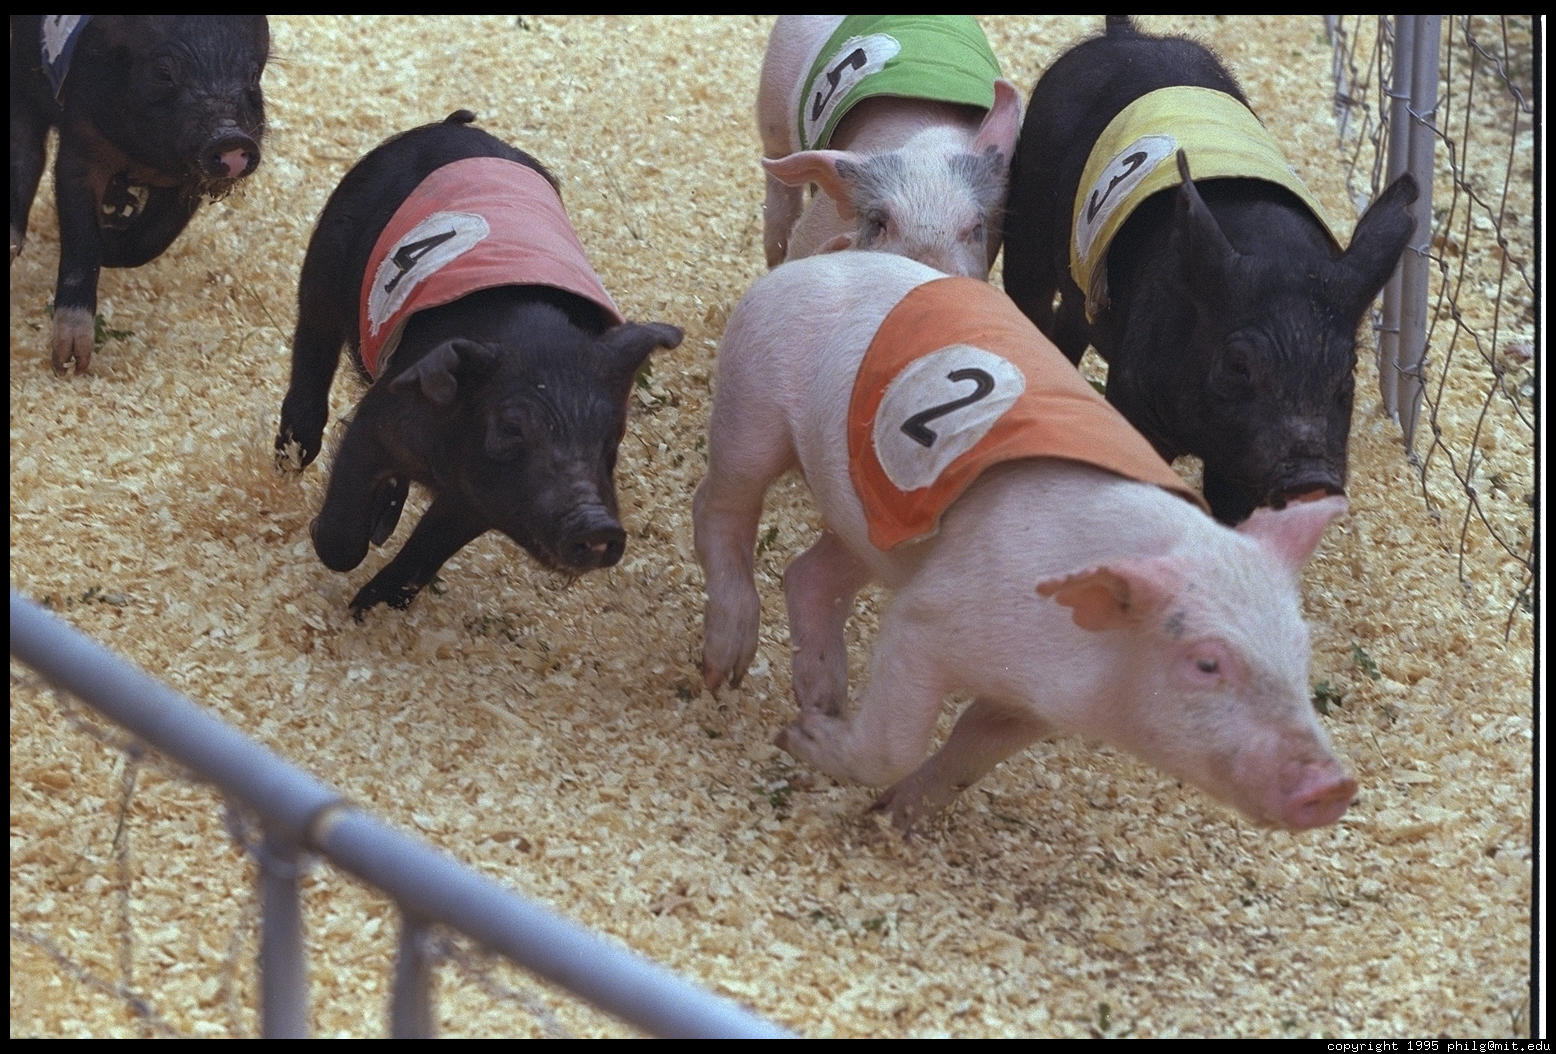 http://legalectric.org/f/legacy/pig-racing-16.4.jpg